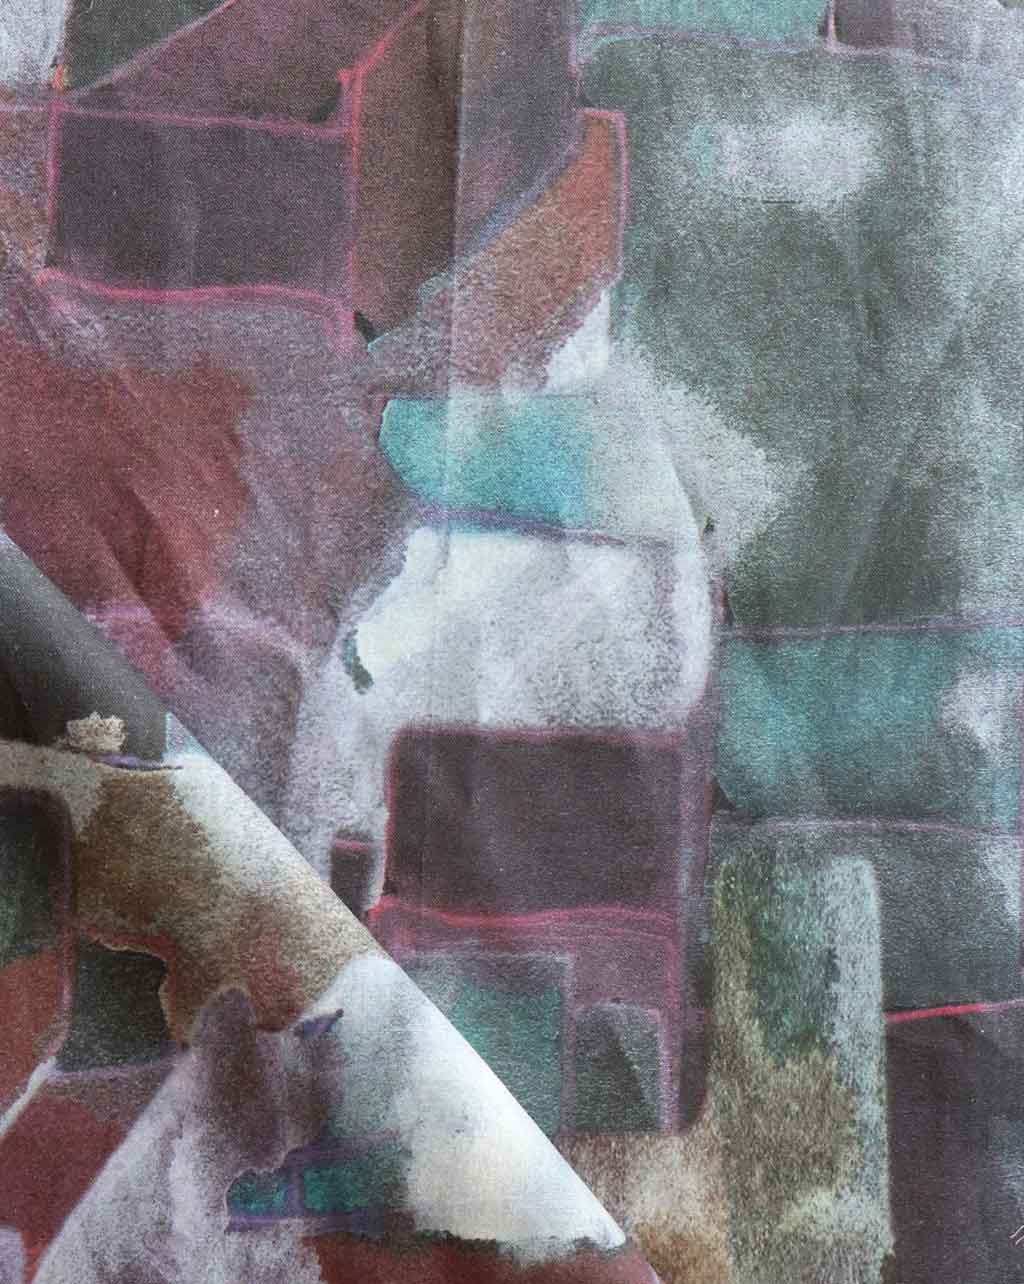 A close up of an abstract painting with a watercolor look on Medina Fabric||Tesoro in Marrakesh roofs.